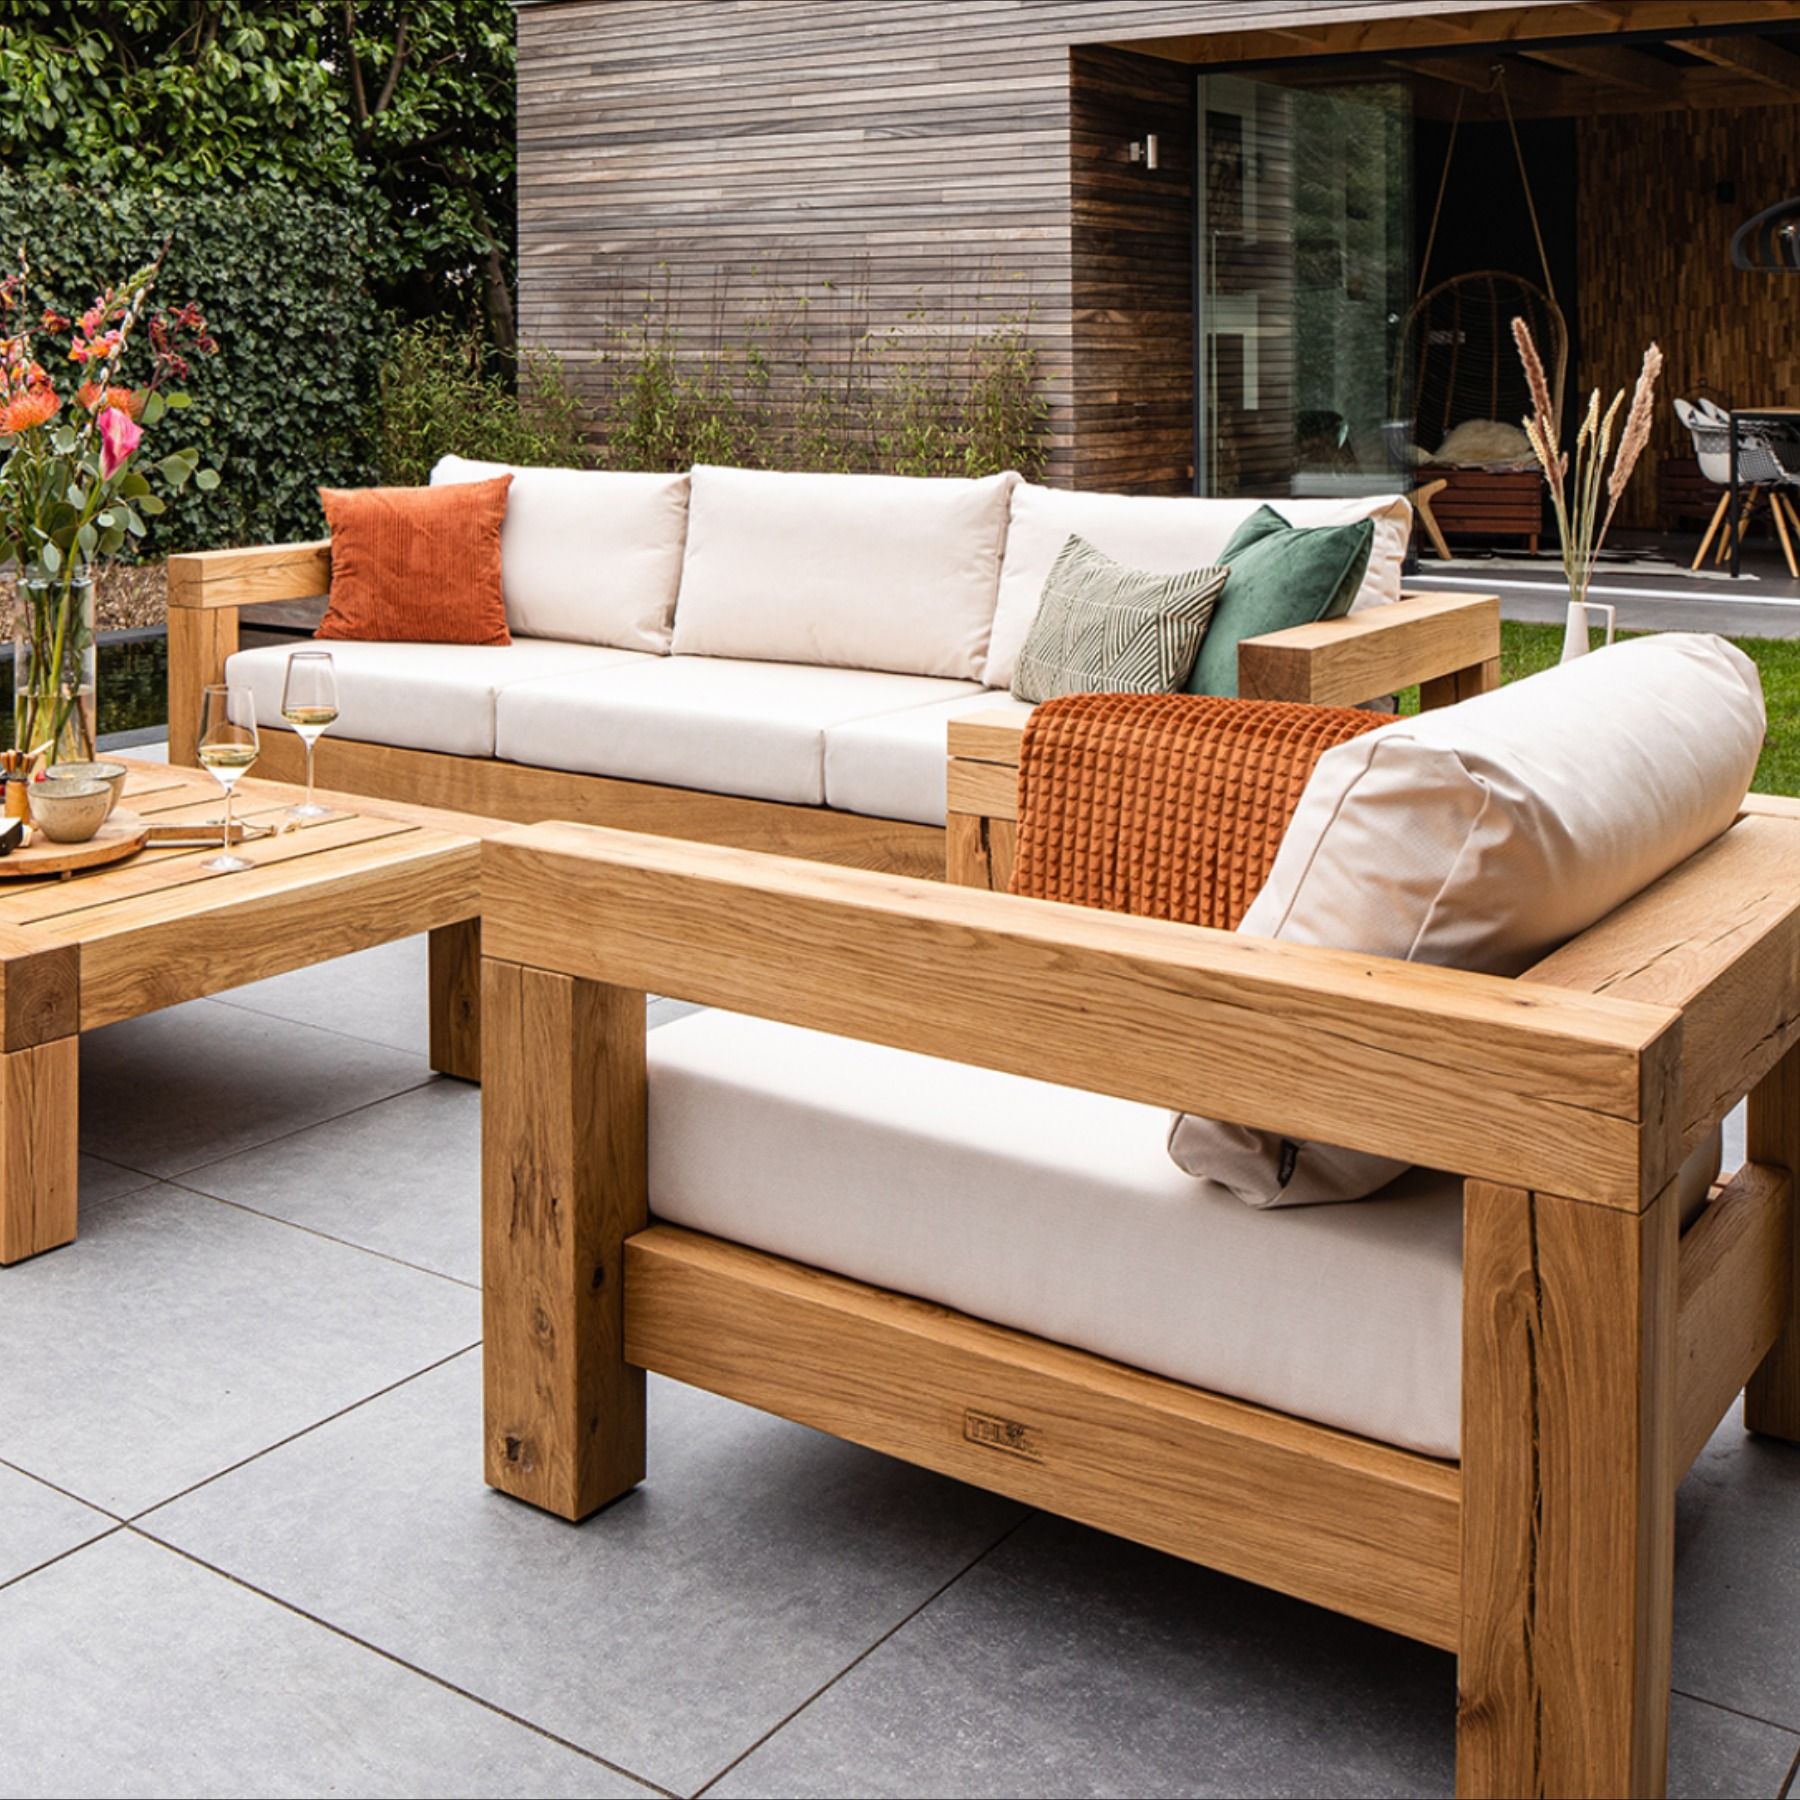 The Charm of Wood Outdoor Furniture: Enhancing Your Outdoor Space with Natural Elegance